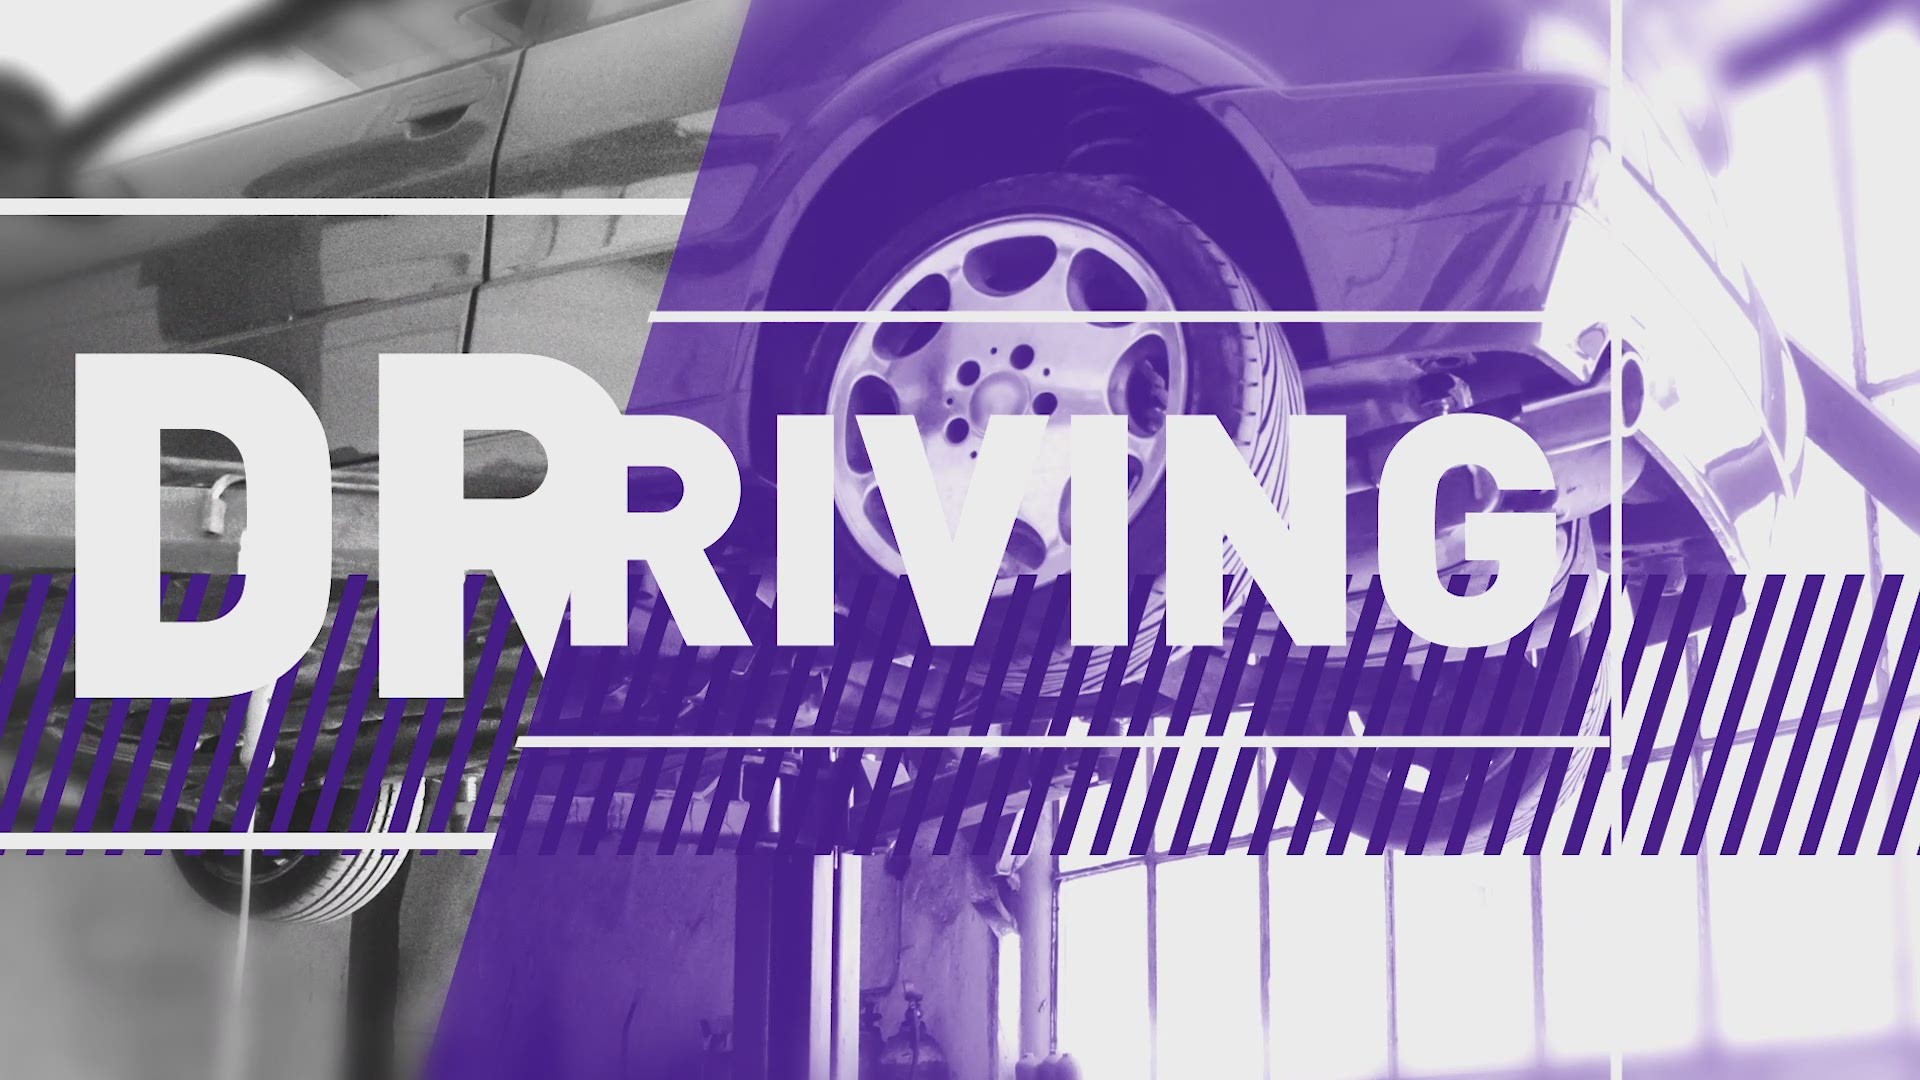 Find out which vehicle was crowned the Best Of 2019 in this week’s segment of Driving Smart.